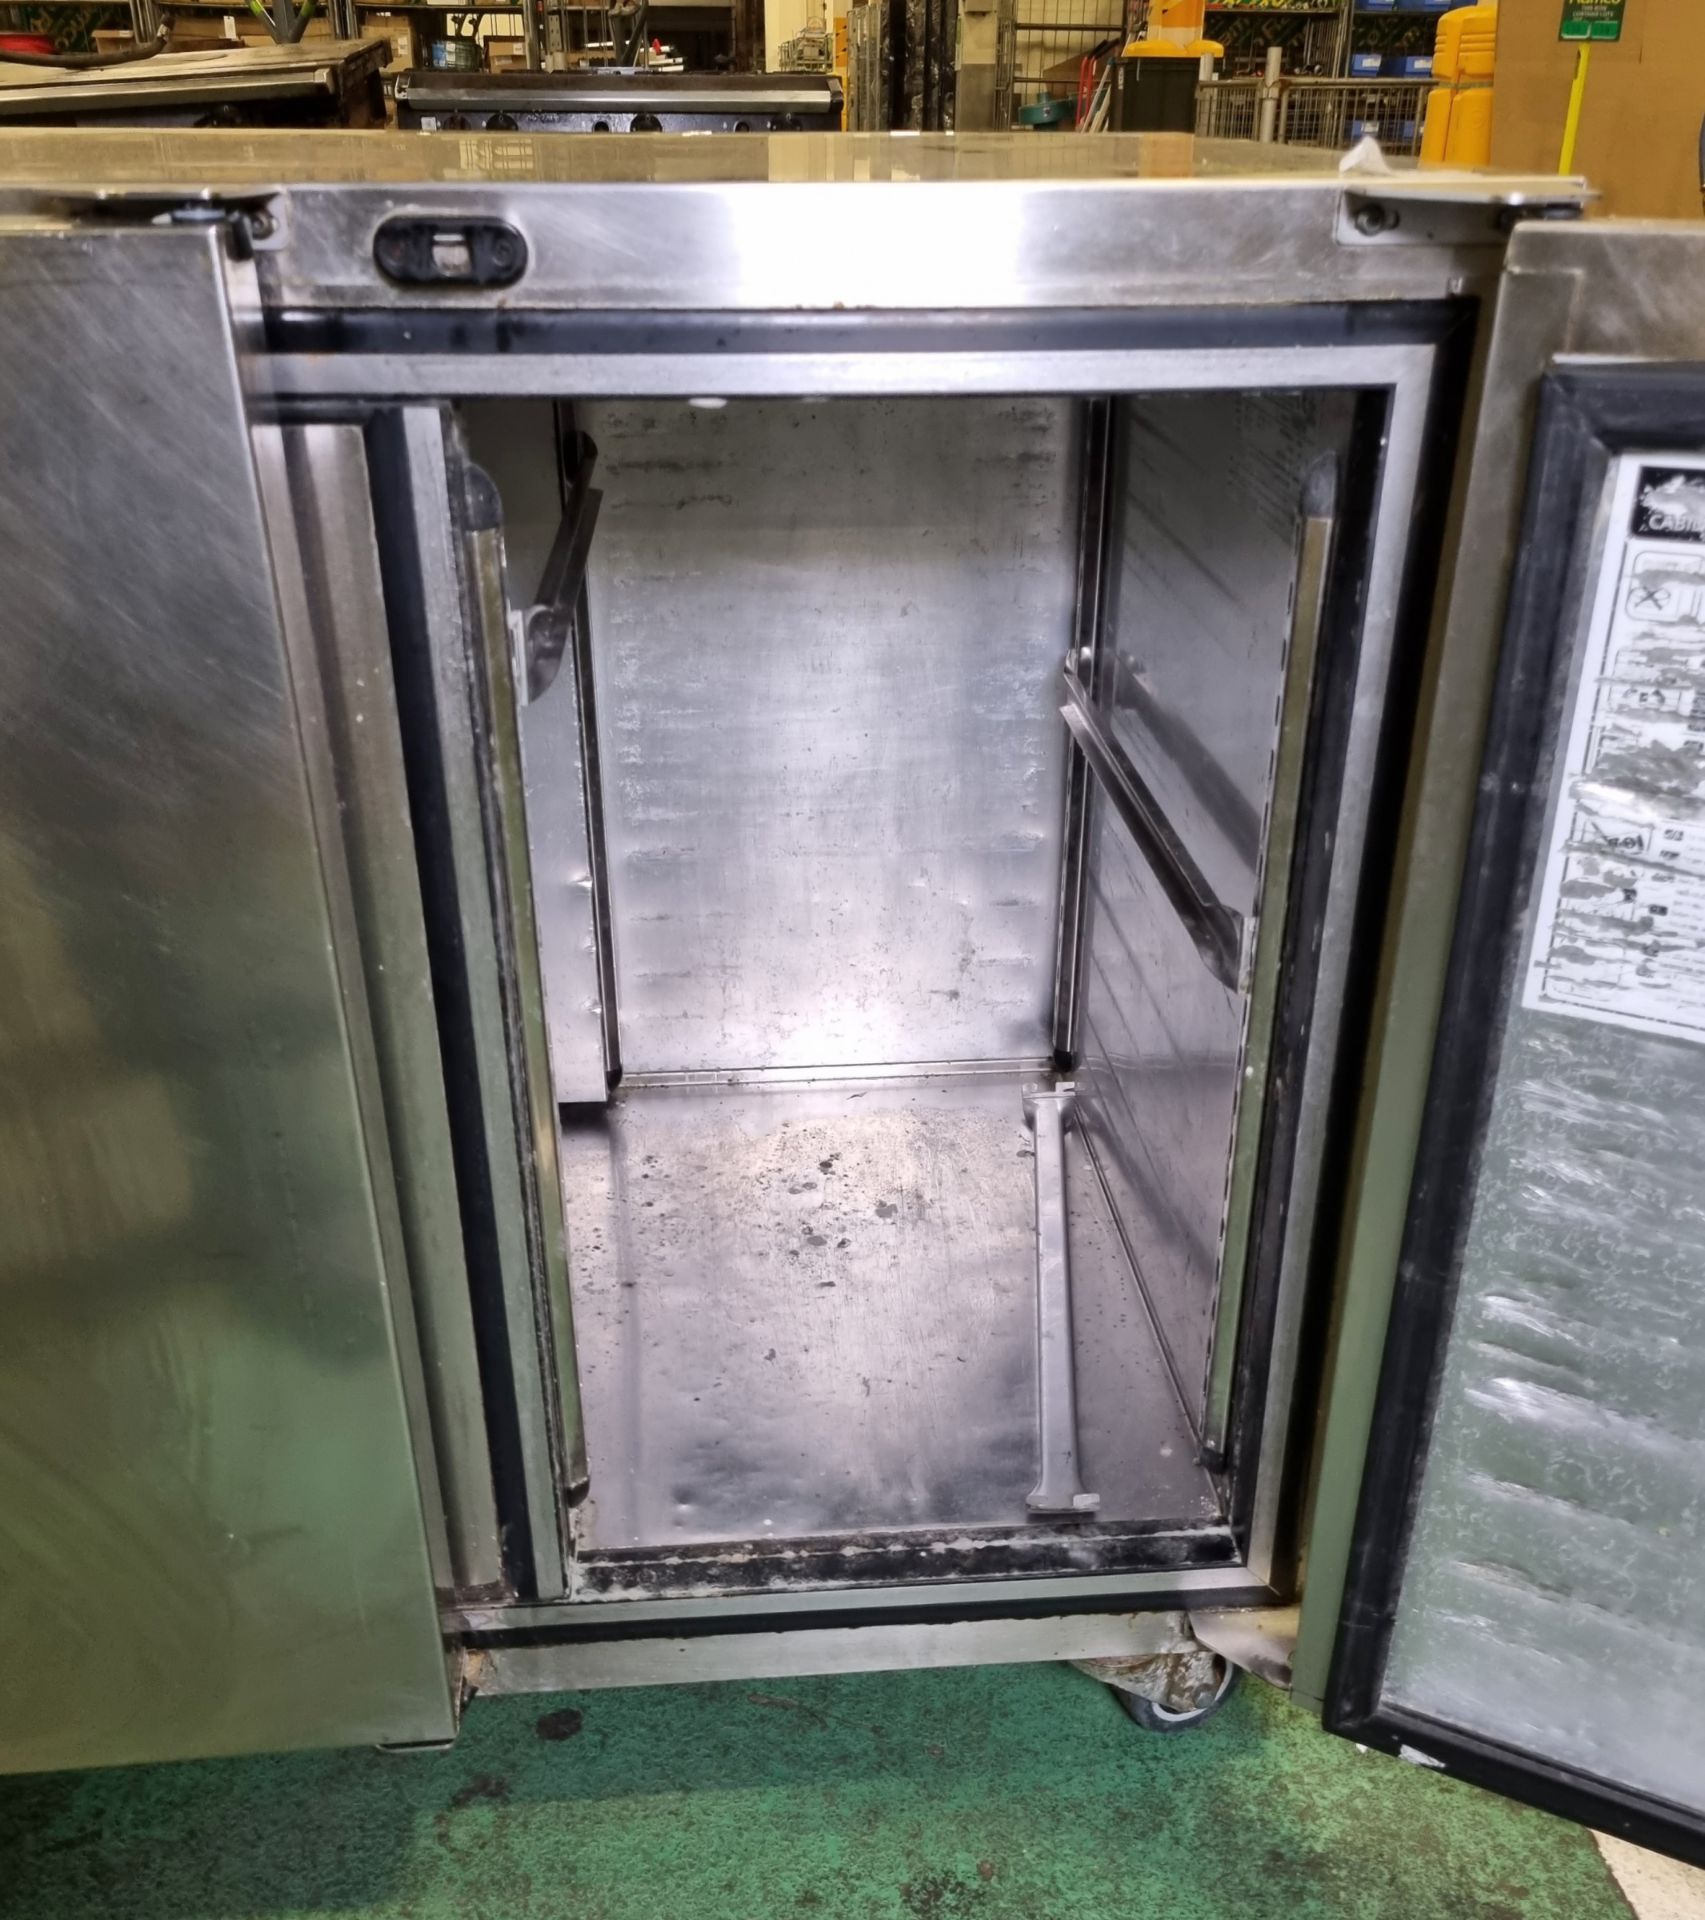 Fosters EPRO1/4H refrigerator - L 2320 x W 700 x H 830mm - Image 3 of 6